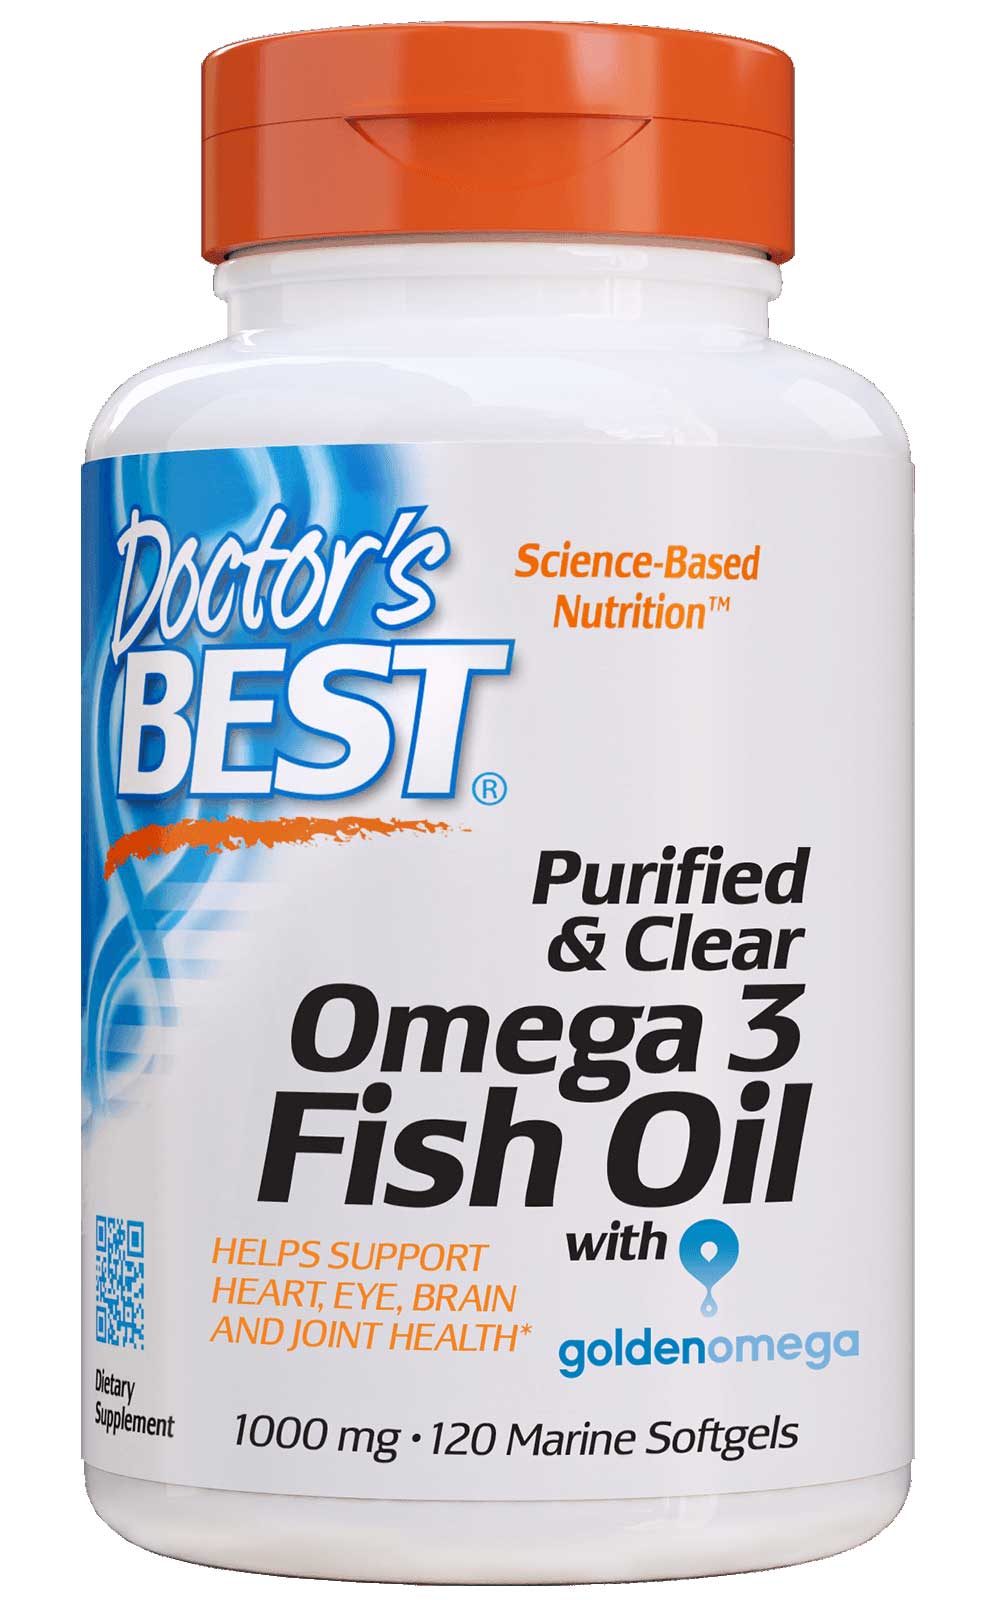 Doctor's Best Purified & Clear Omega 3 Fish Oil with Golden Omega